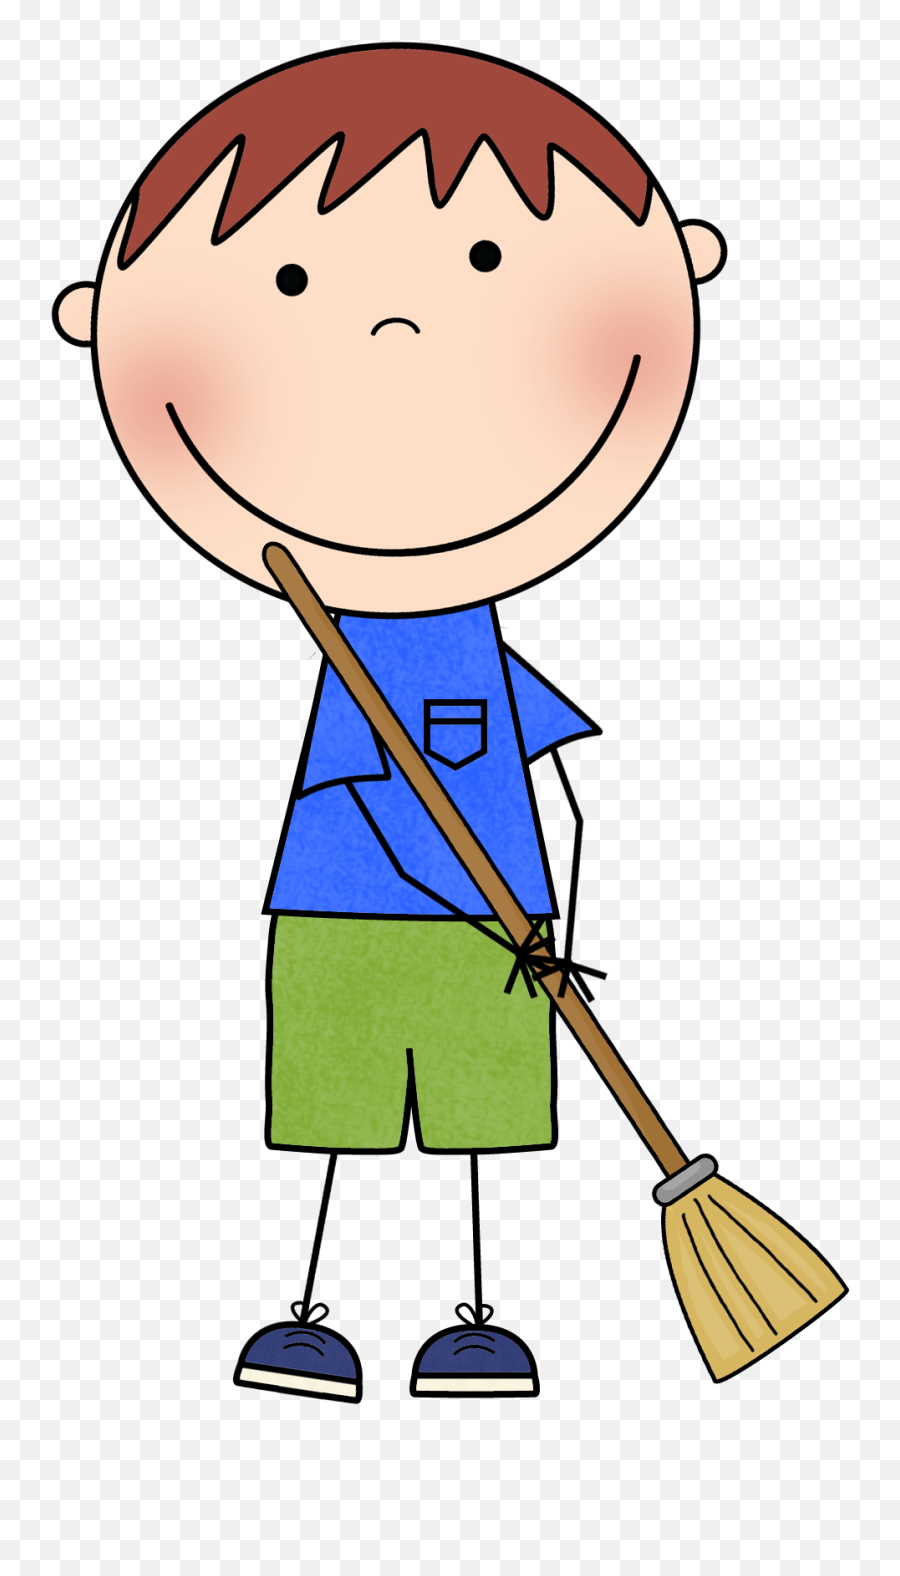 Cleaning Clipart Clean Sink Cleaning Clean Sink Transparent - Kid Cleaning Clipart Emoji,Cleaning Clipart